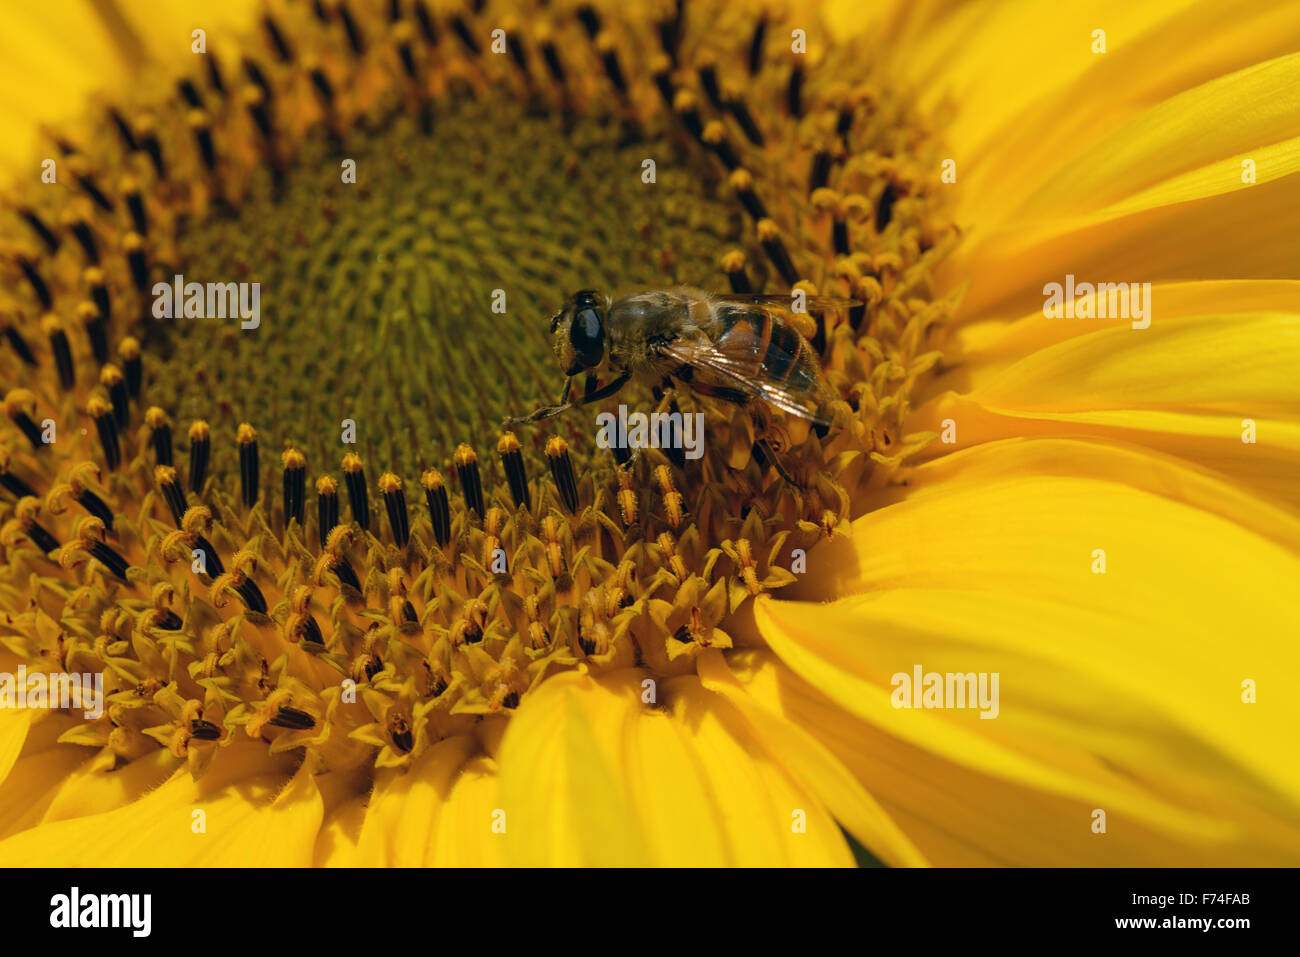 Drone fly Eristalis tenax is sitting on bright yellow sunflower. Stock Photo